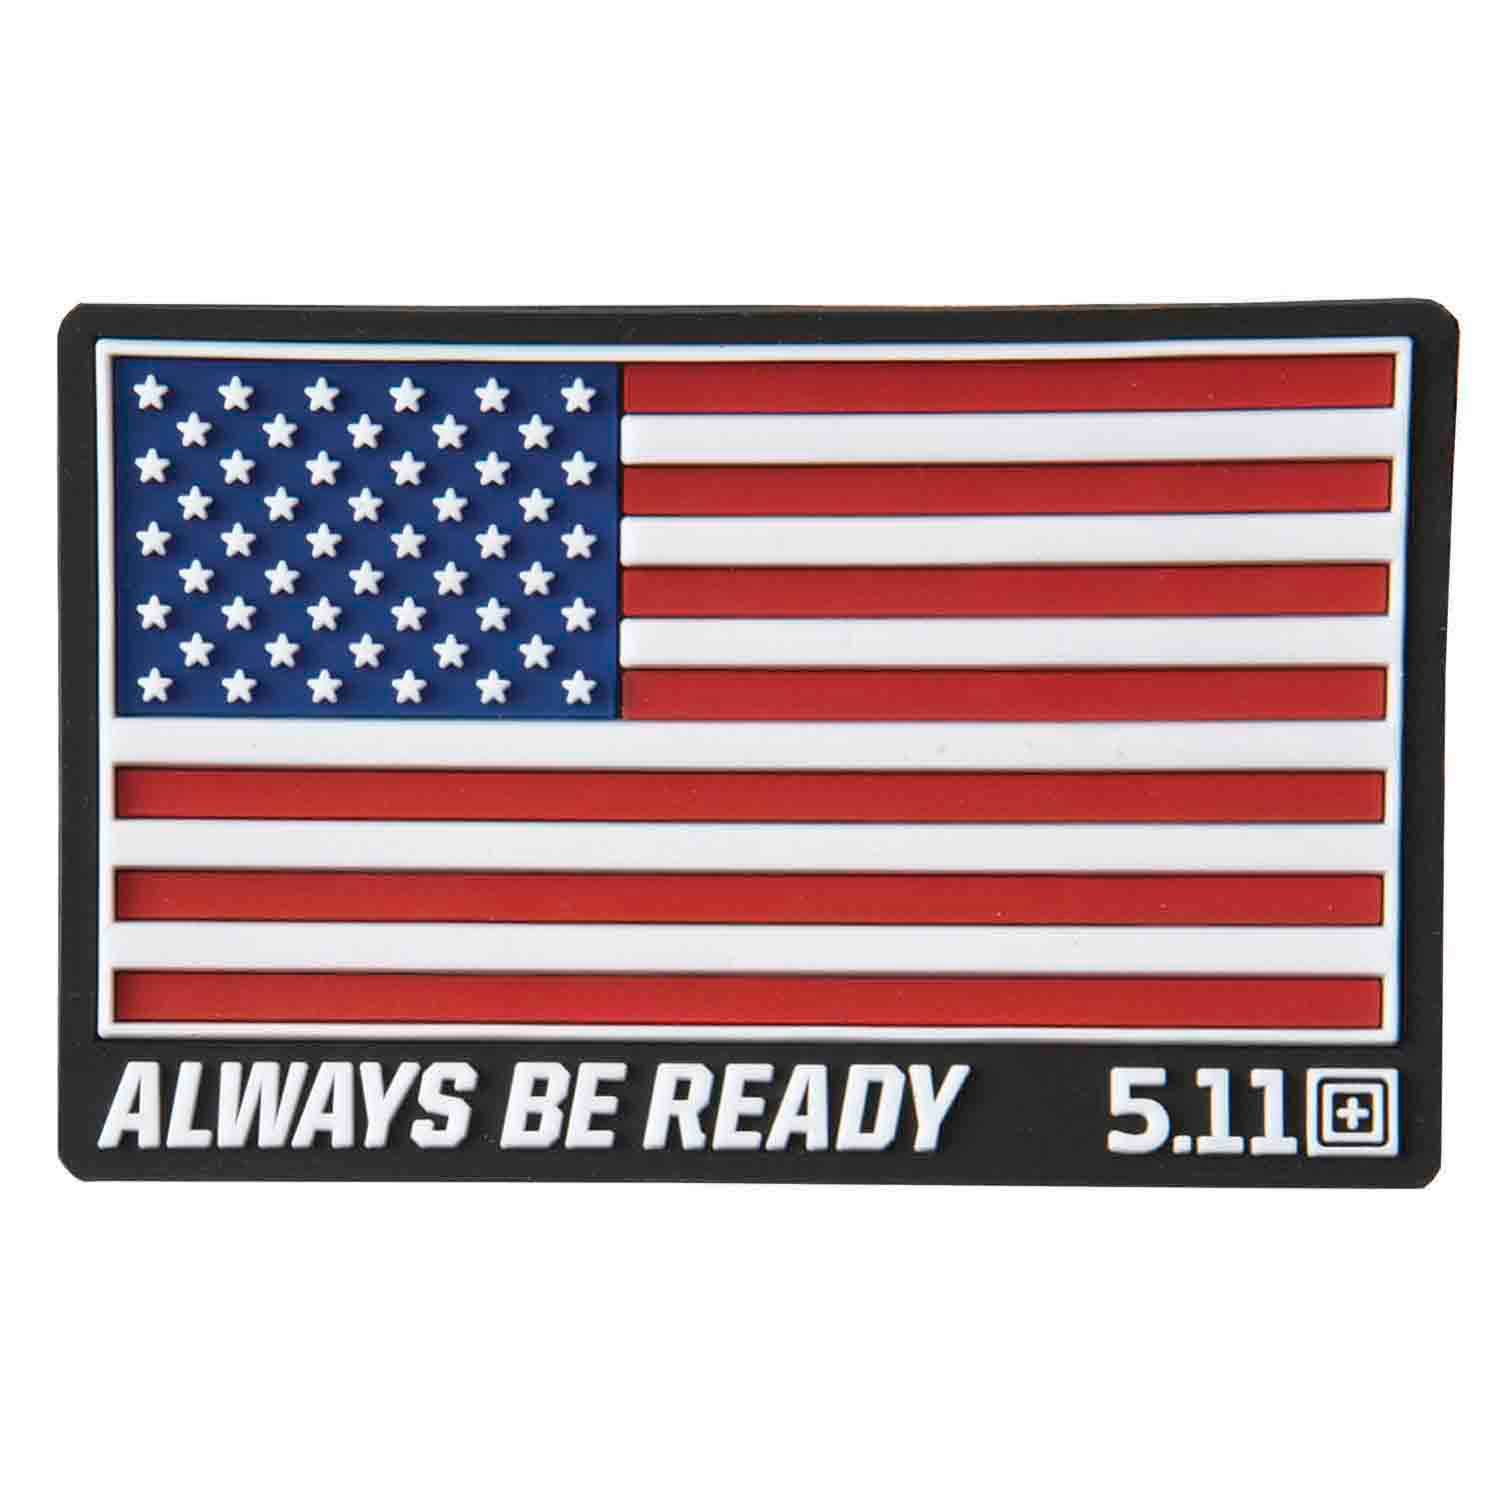 5.11 TACTICAL USA MORALE PATCH